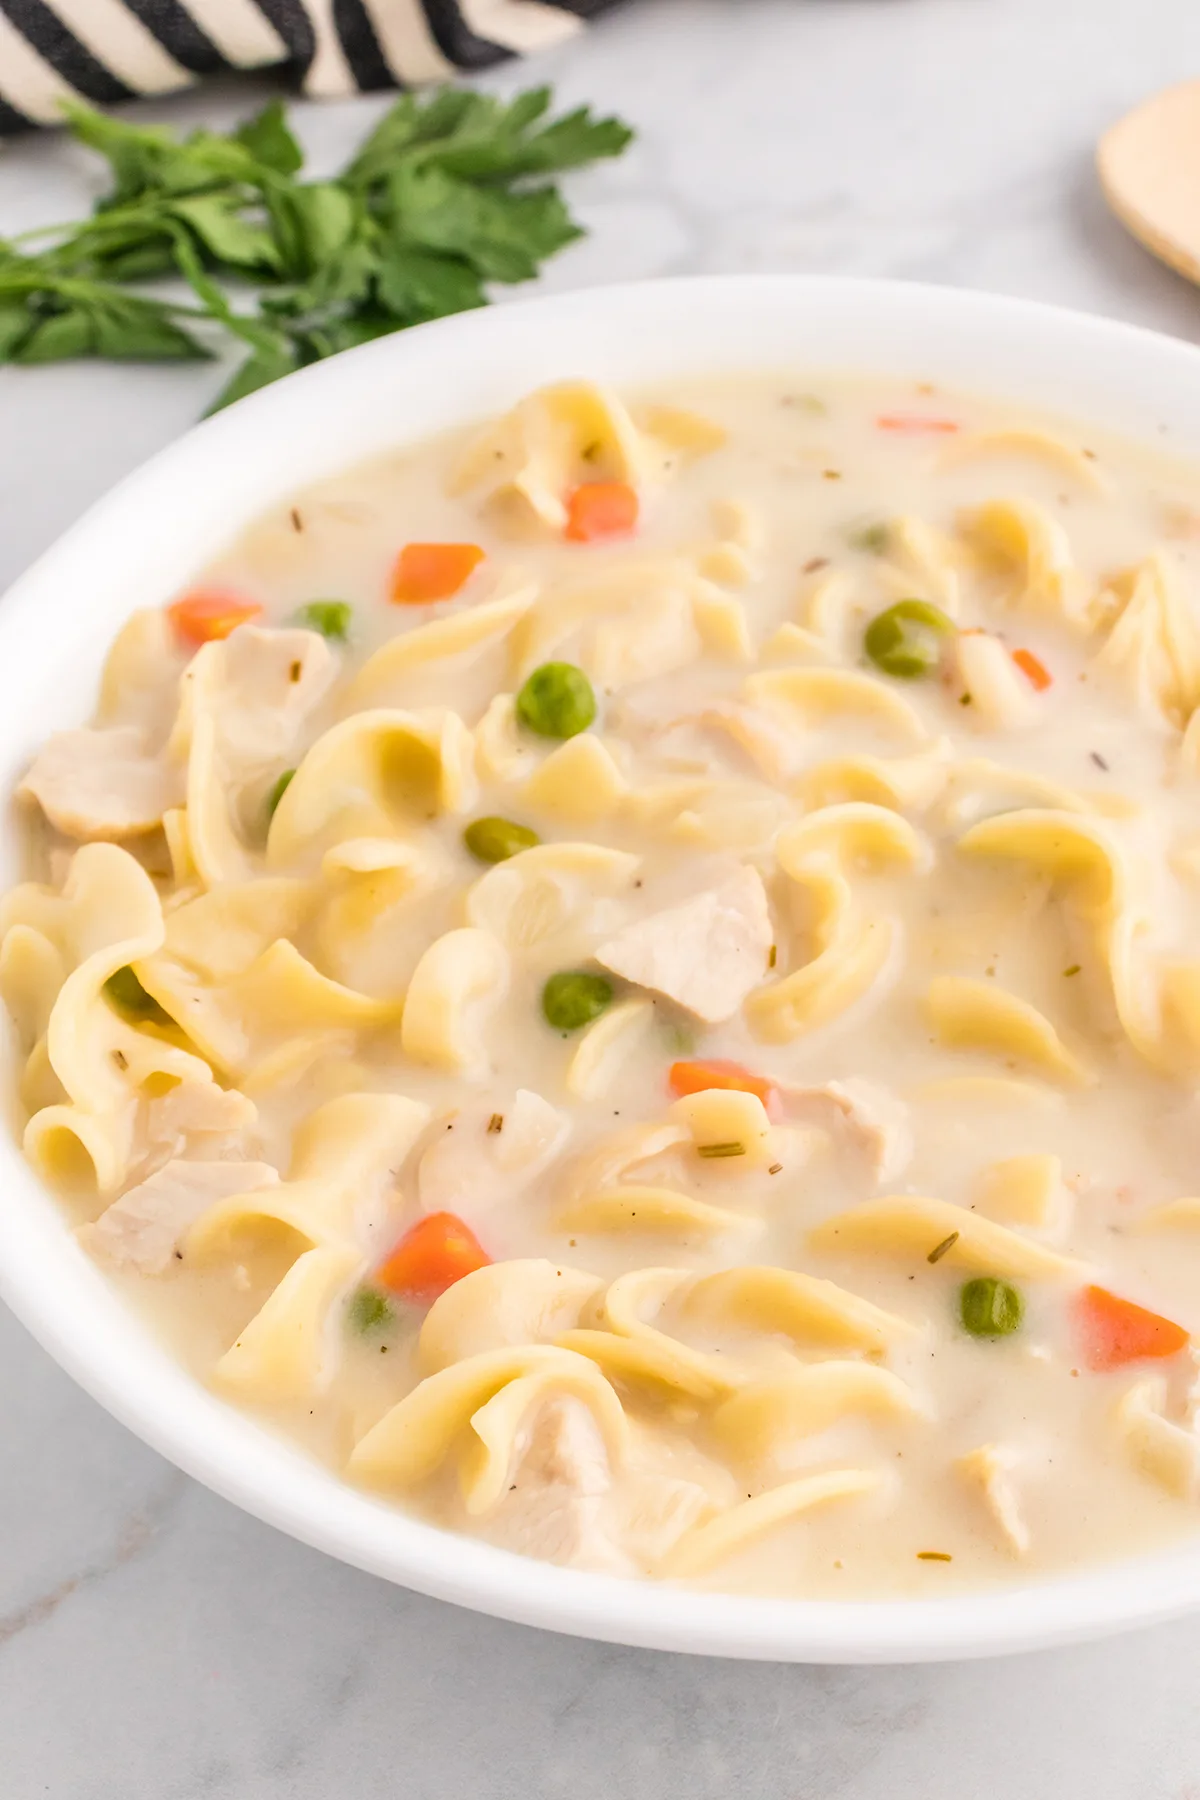 angled down shot of a white bowl filled with creamy chicken noodle soup with peas and carrots